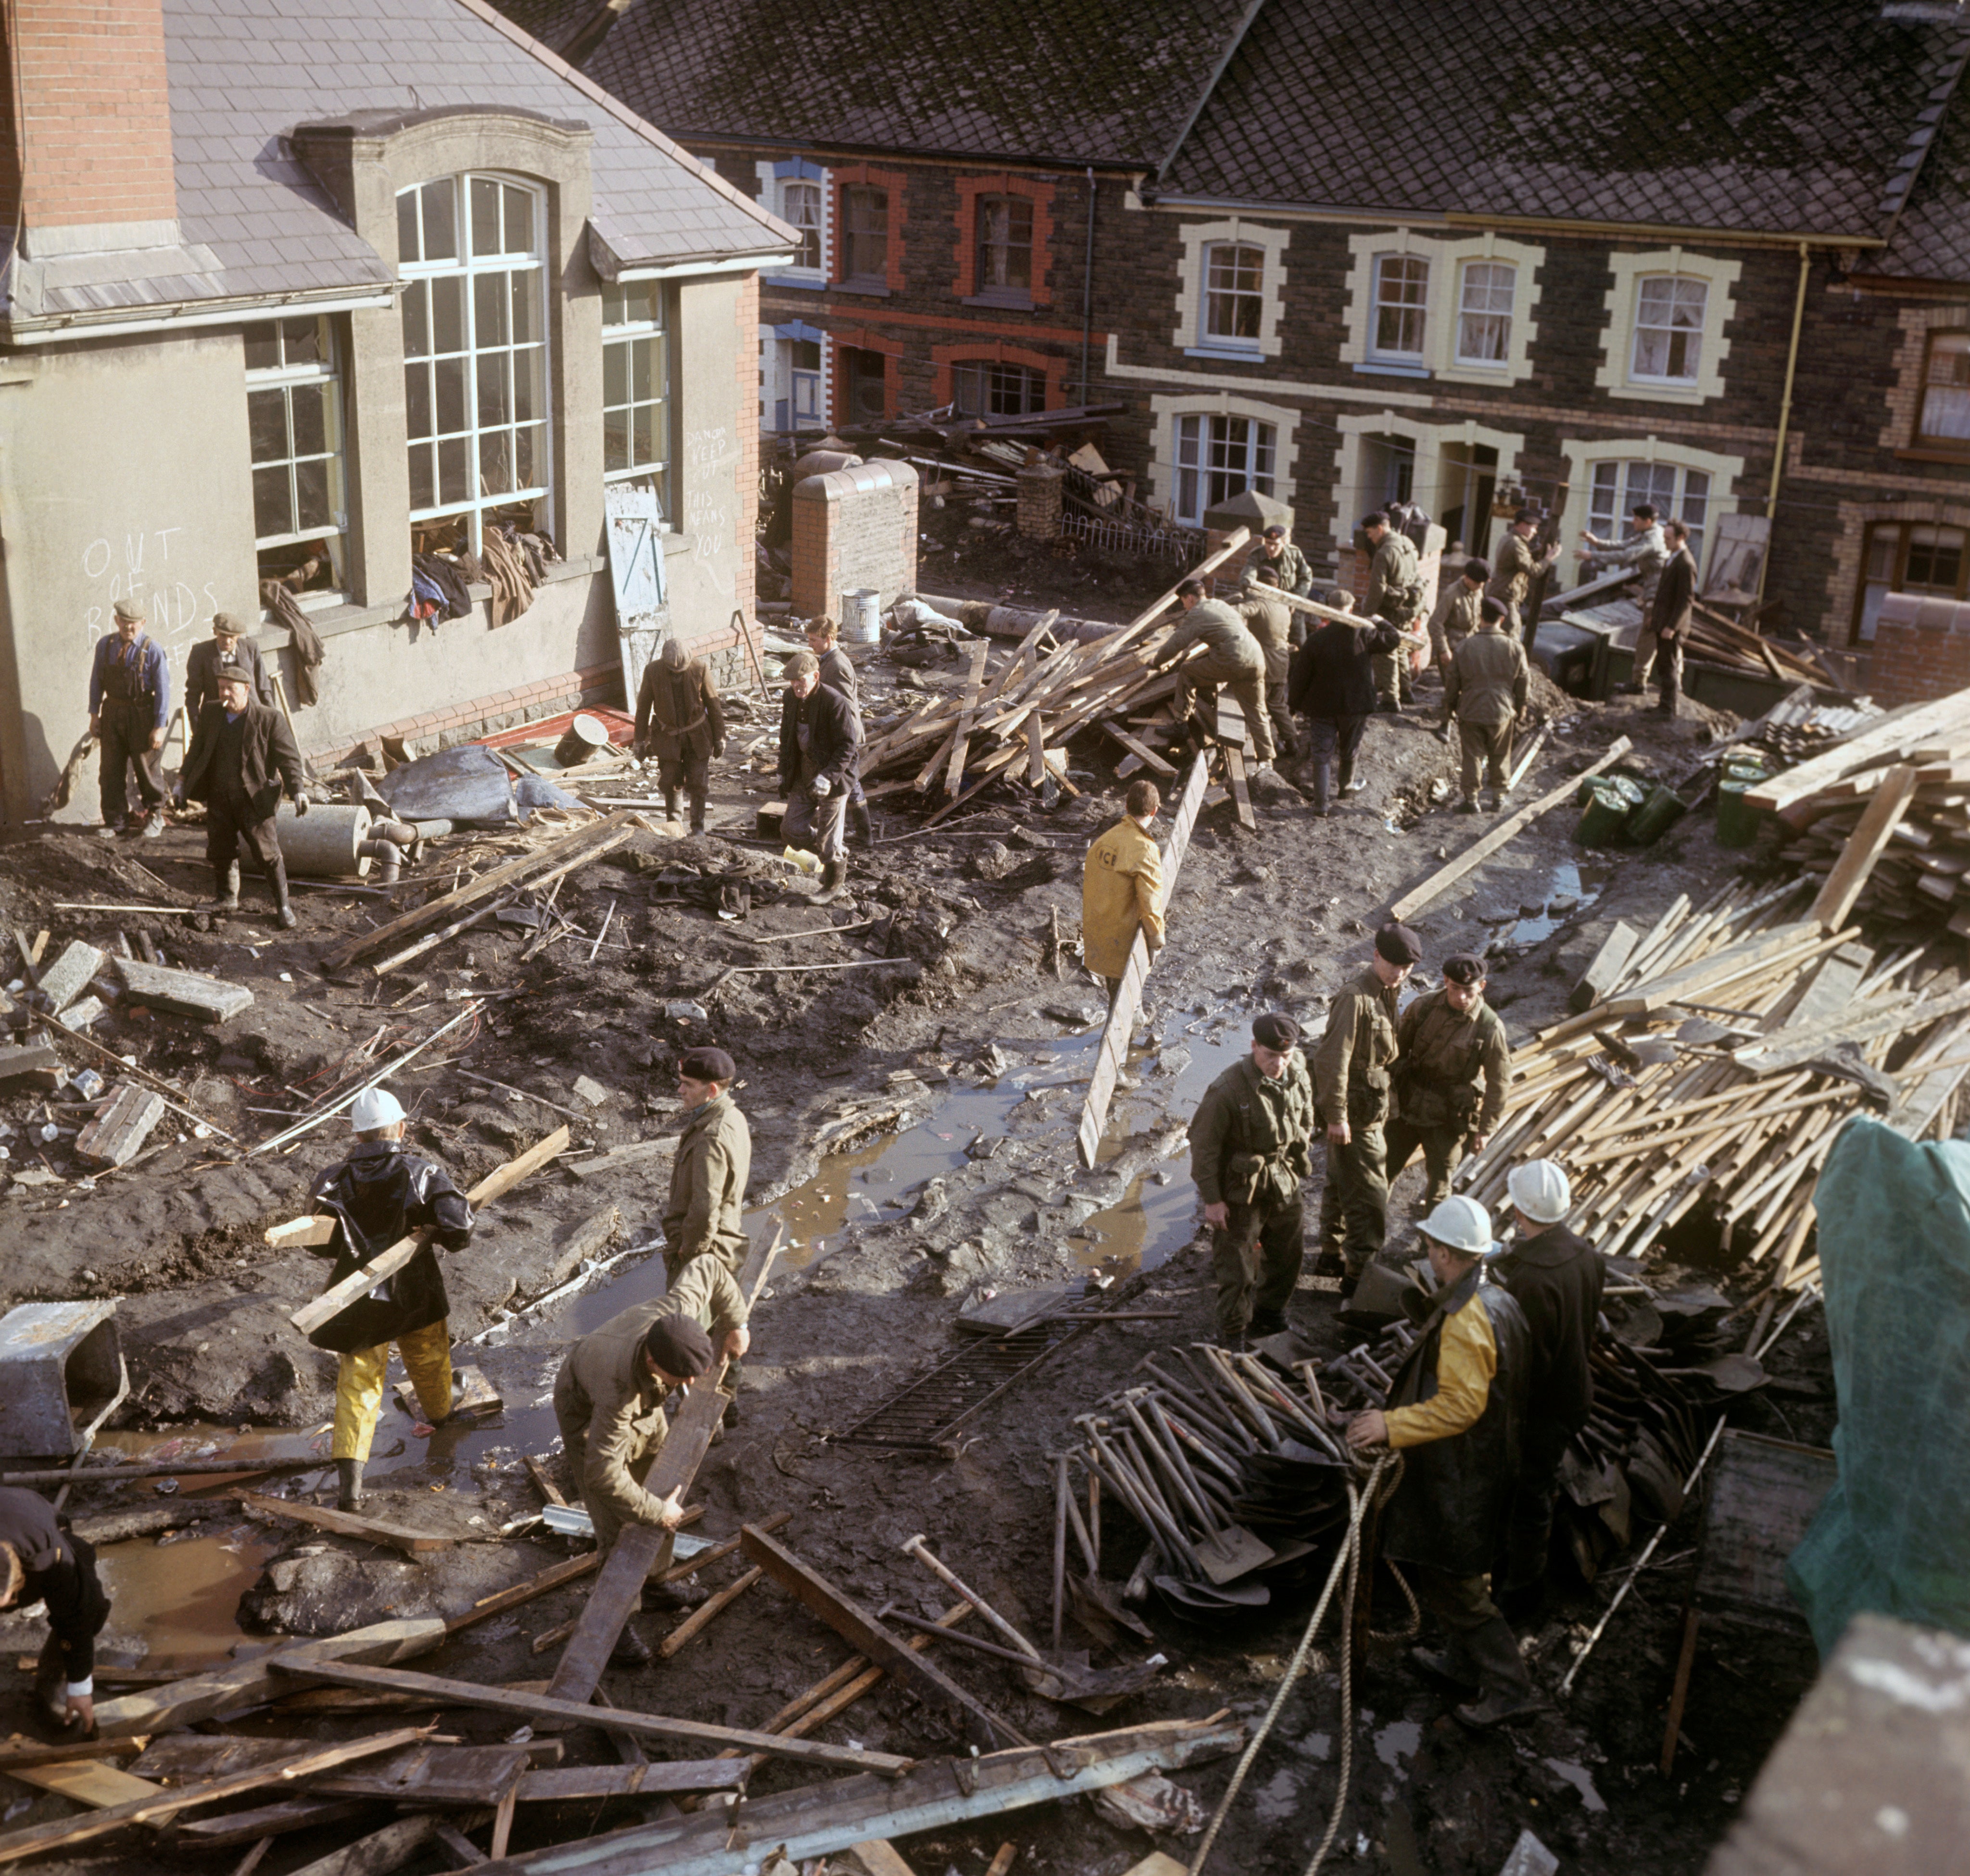 Soldiers and miners at work amid the wreckage after a coal tip slid down the mountain and buried children in their school in the South Wales mining village of Aberfan (PA)